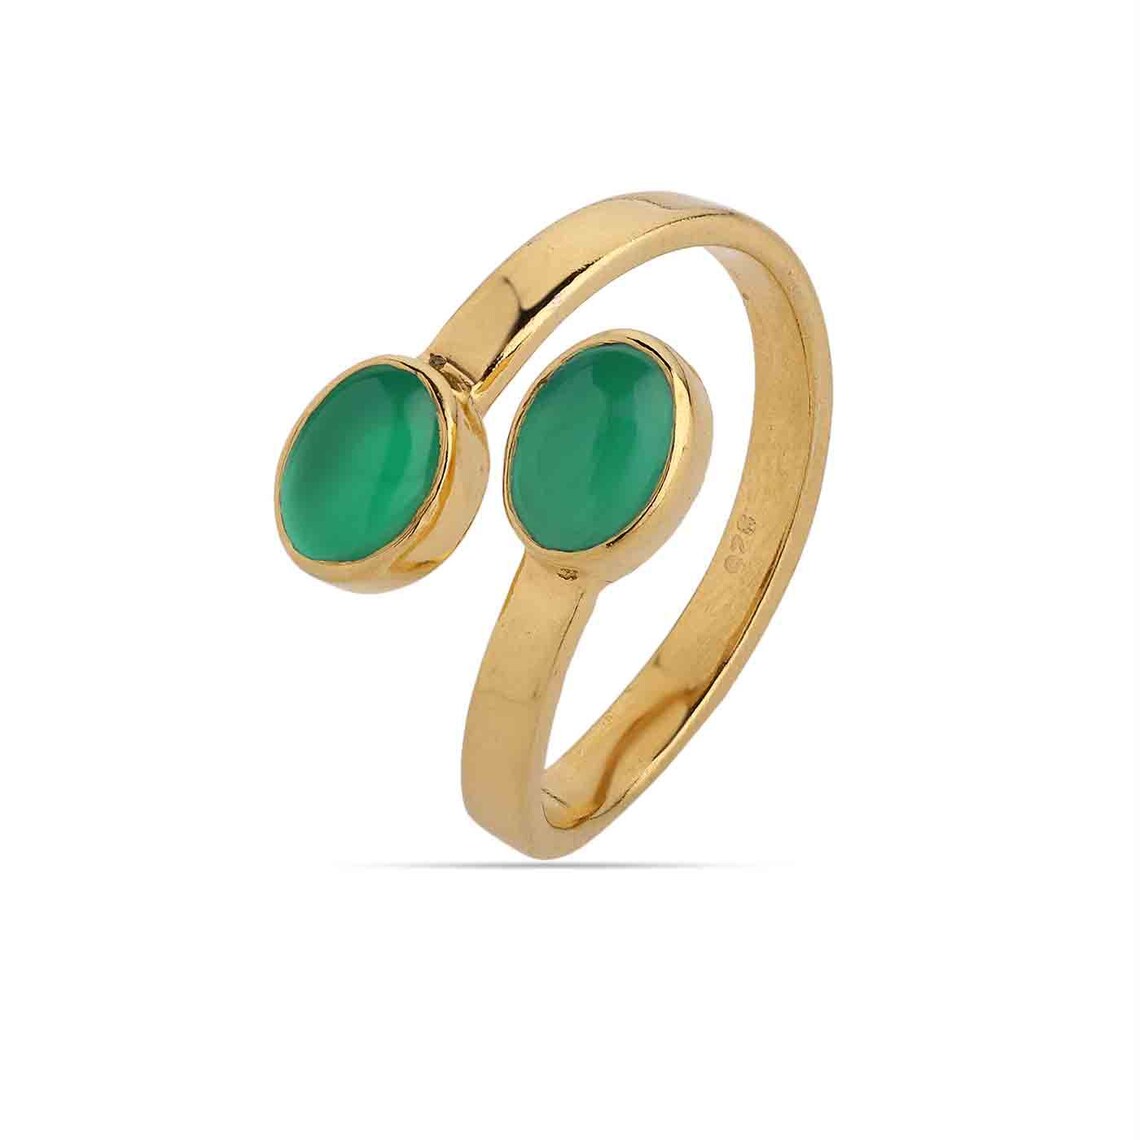 Green Onyx Ring Gold, Solitaire Stone Ring, Green Stone Ring, Stackable Ring, Oval Stone Ring, Sterling Silver Gold Ring, Gift For Her,